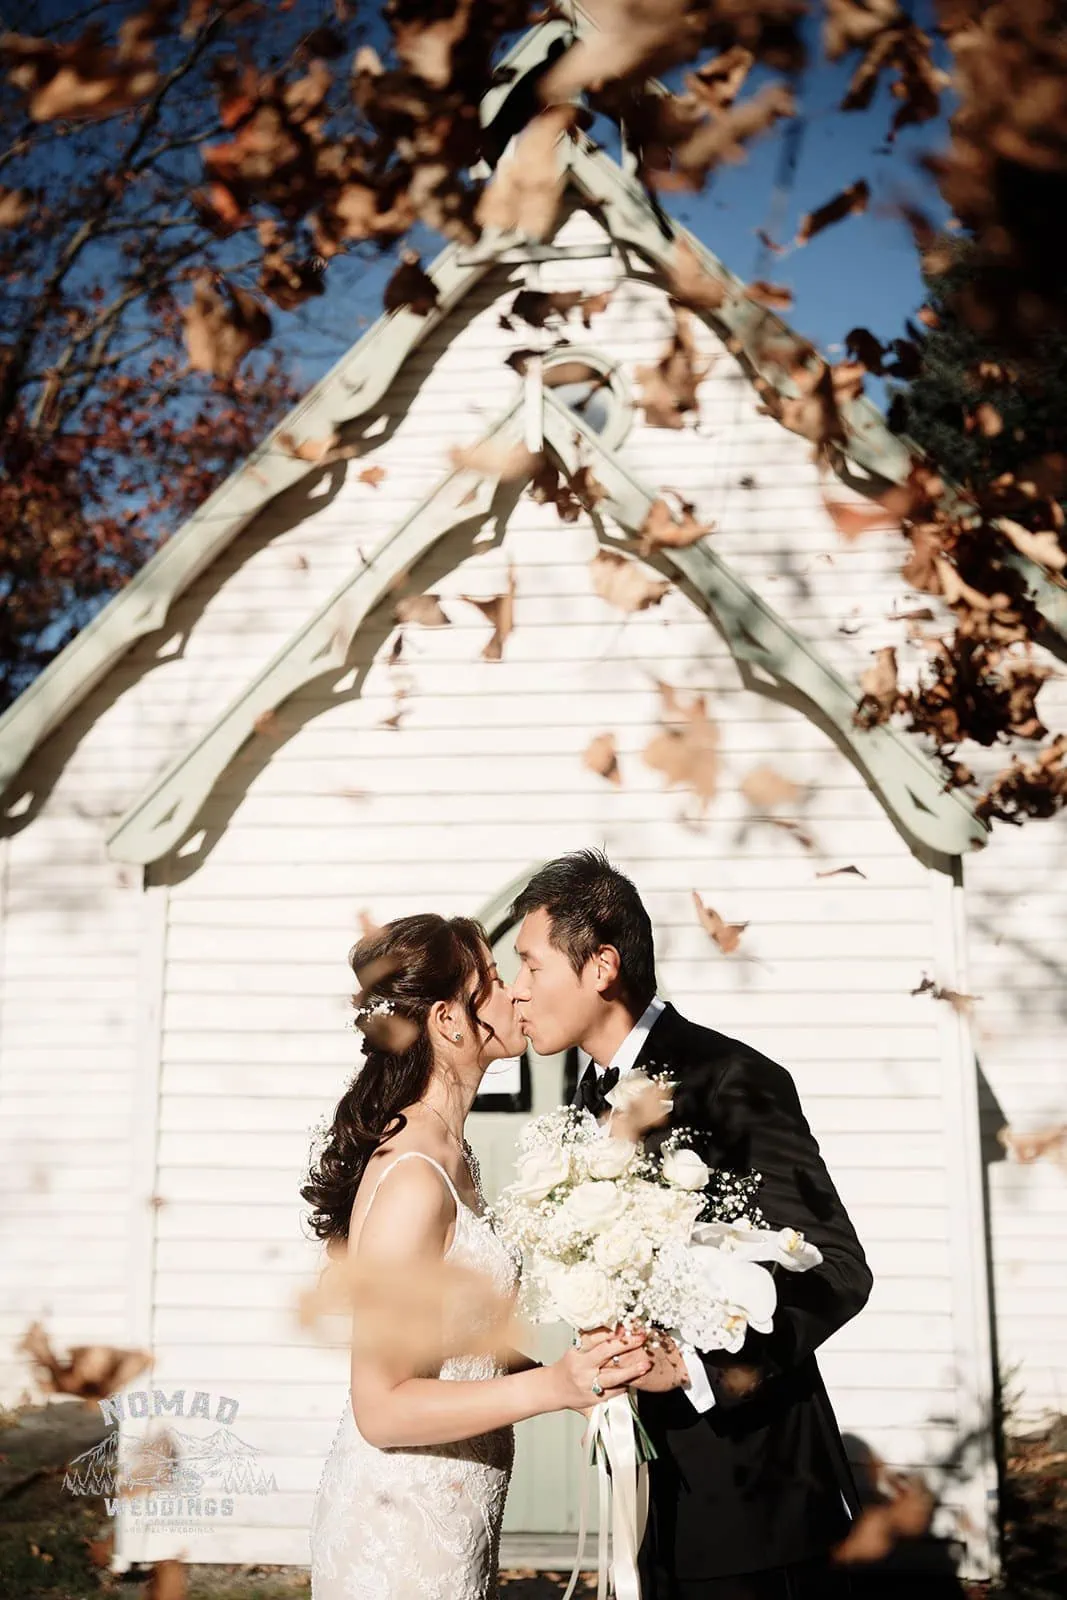 Connie and Andrew have a remarkable pre-wedding shoot in front of a white church.